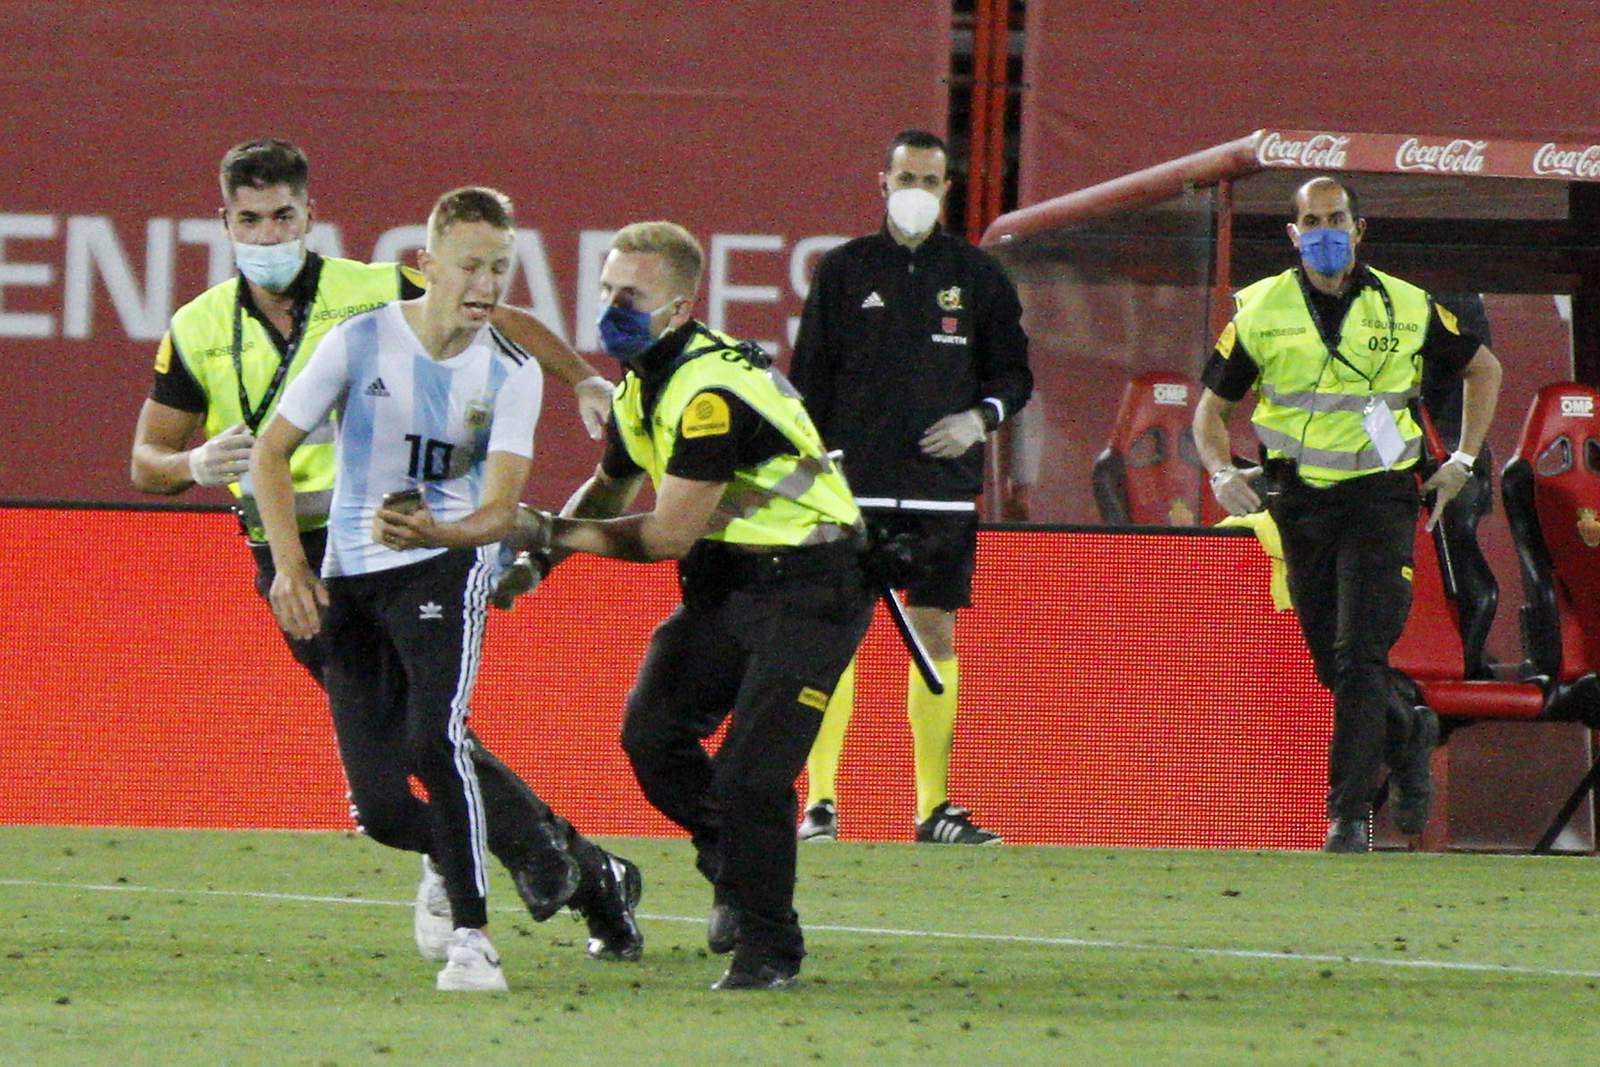 Spanish league to file charges against fan who invaded field